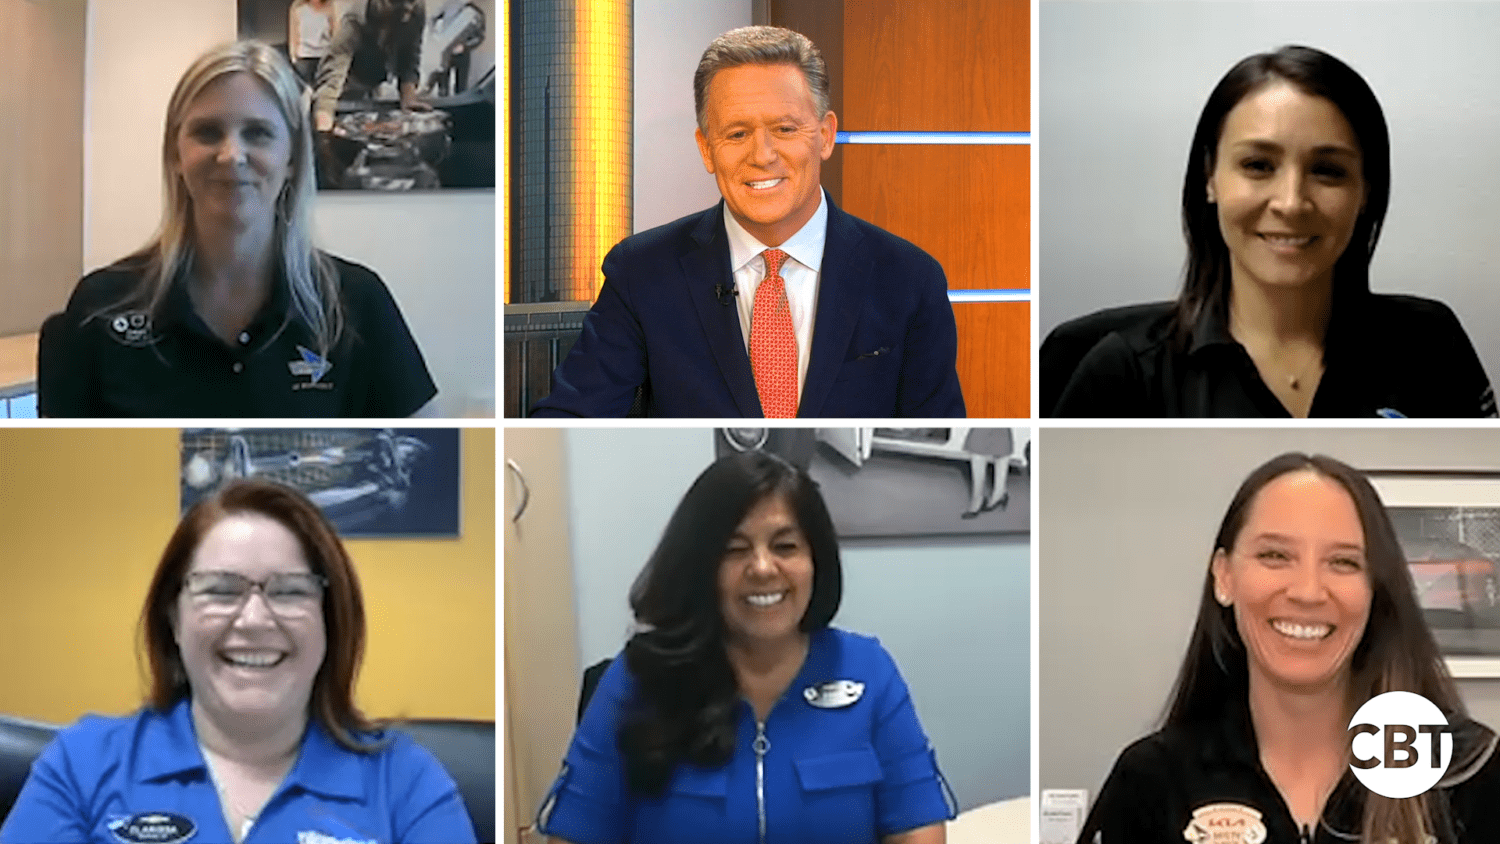 The five women of Courtesy Automotive Group's financing "Dream Team" join Inside Automotive to discuss gender equality in the dealership.